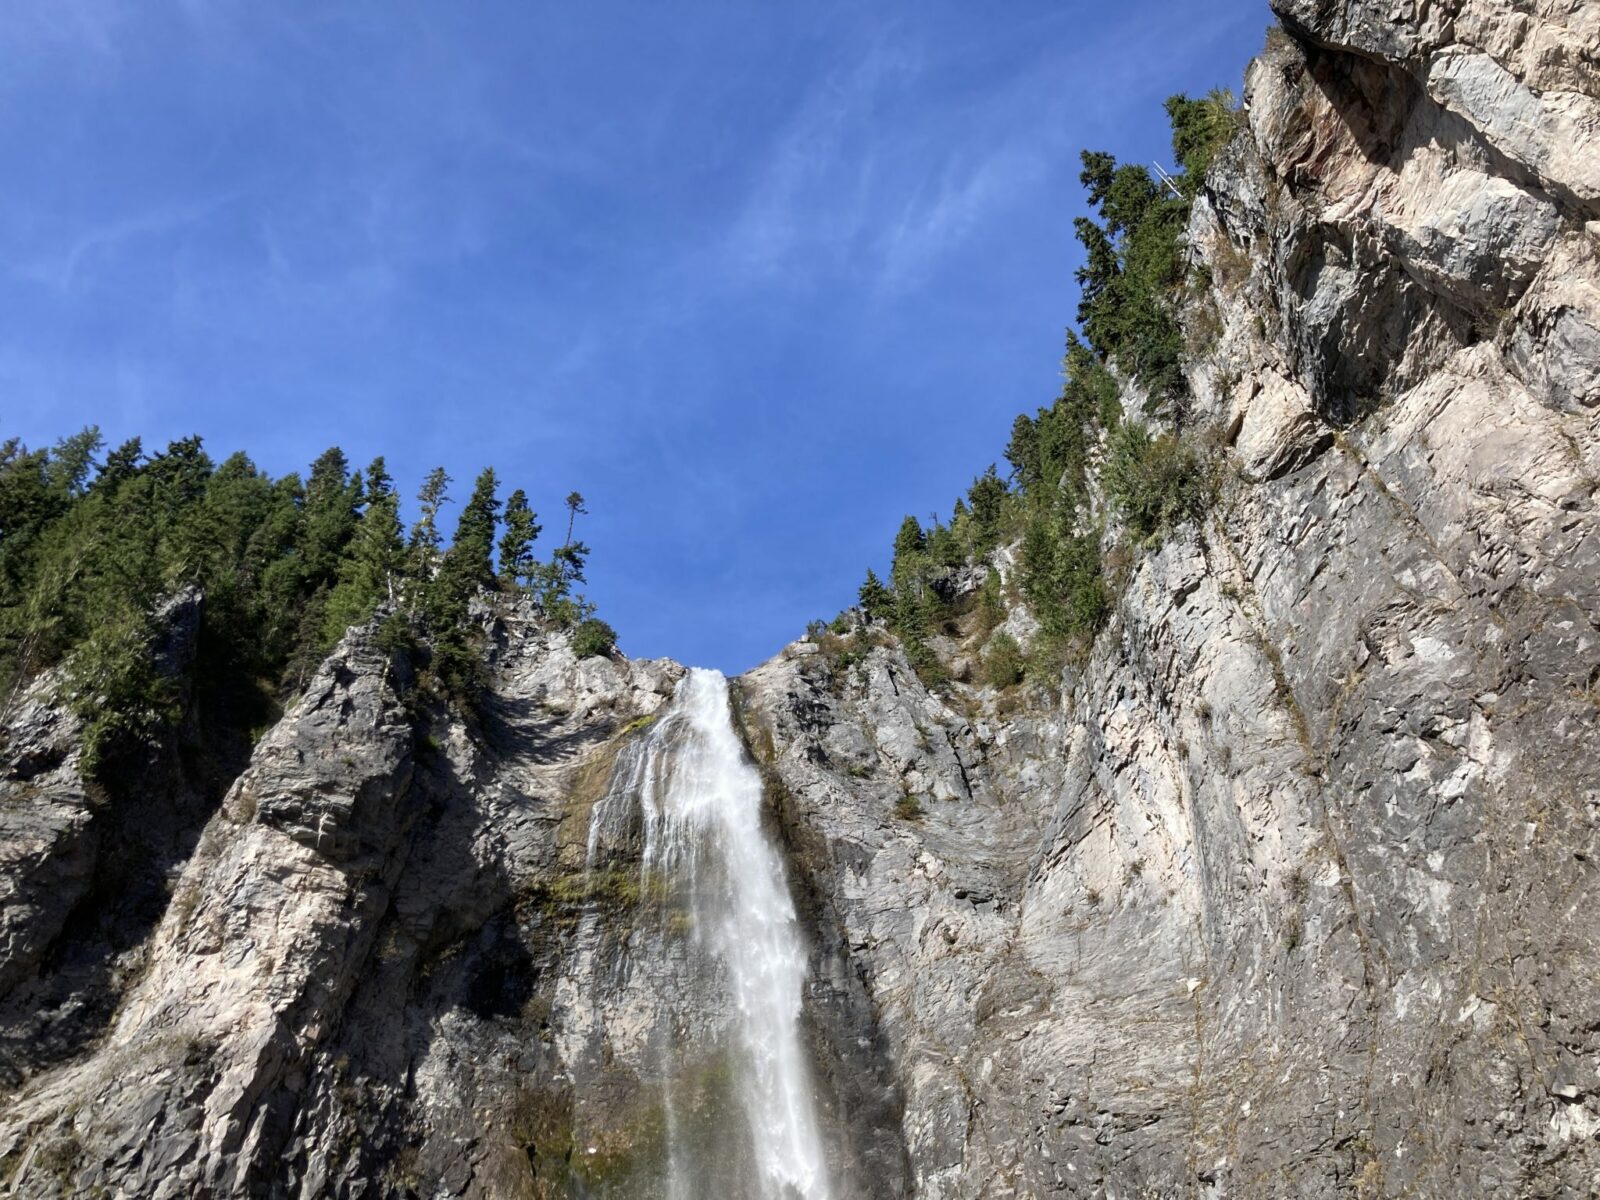 looking up at a high waterfall coming over a cliff with evergreen trees on both sides of the cliff on a sunny day